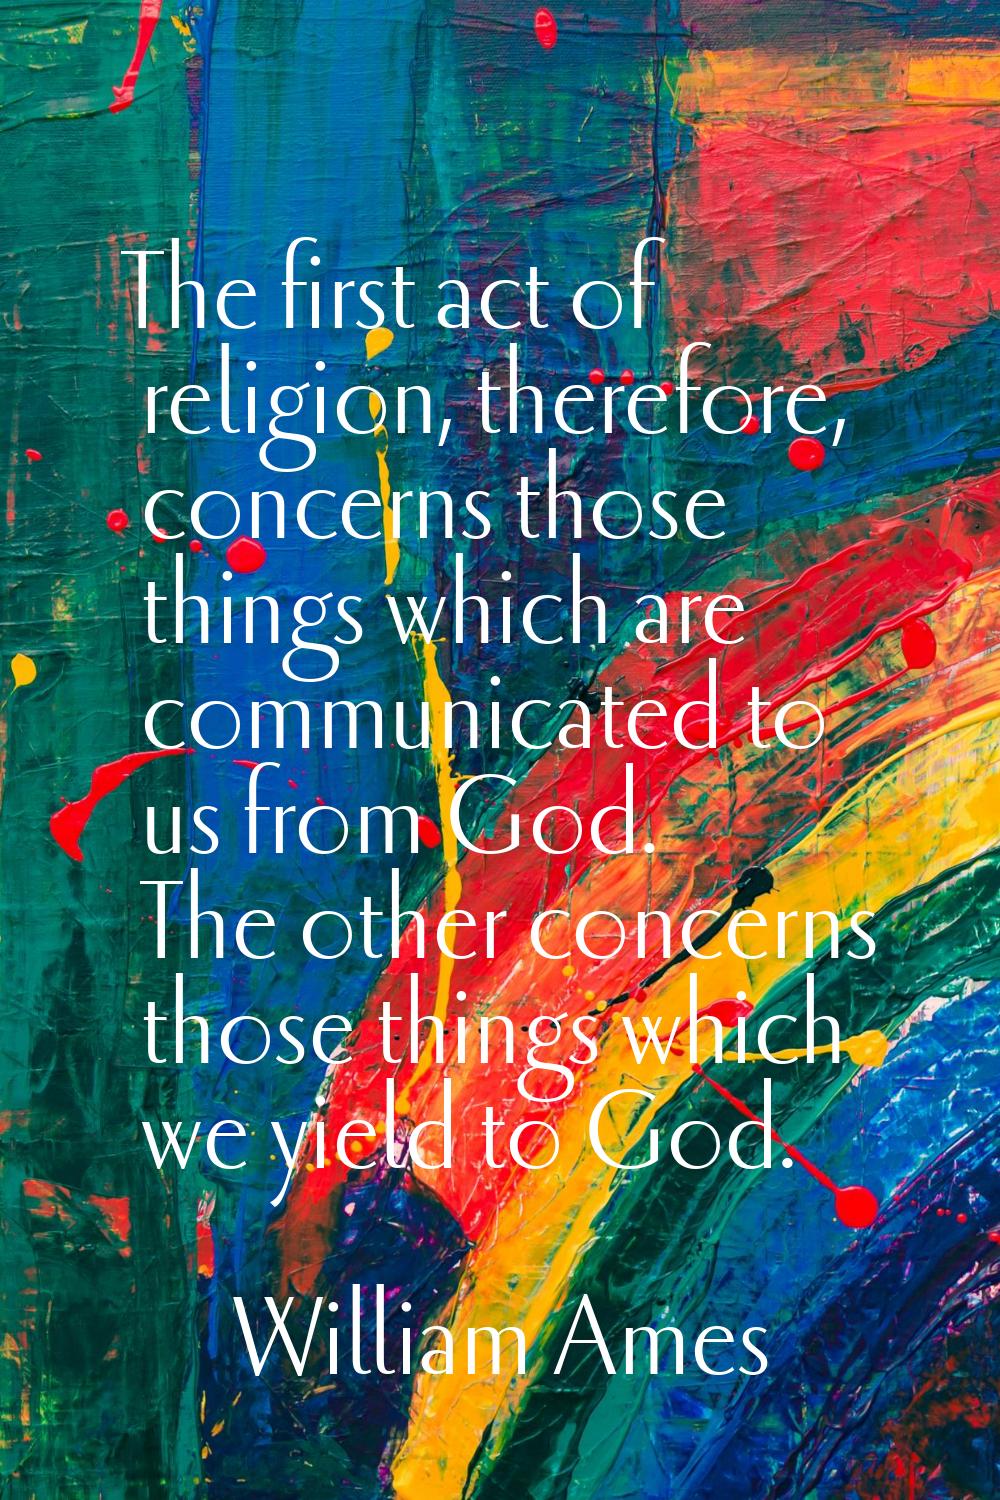 The first act of religion, therefore, concerns those things which are communicated to us from God. 